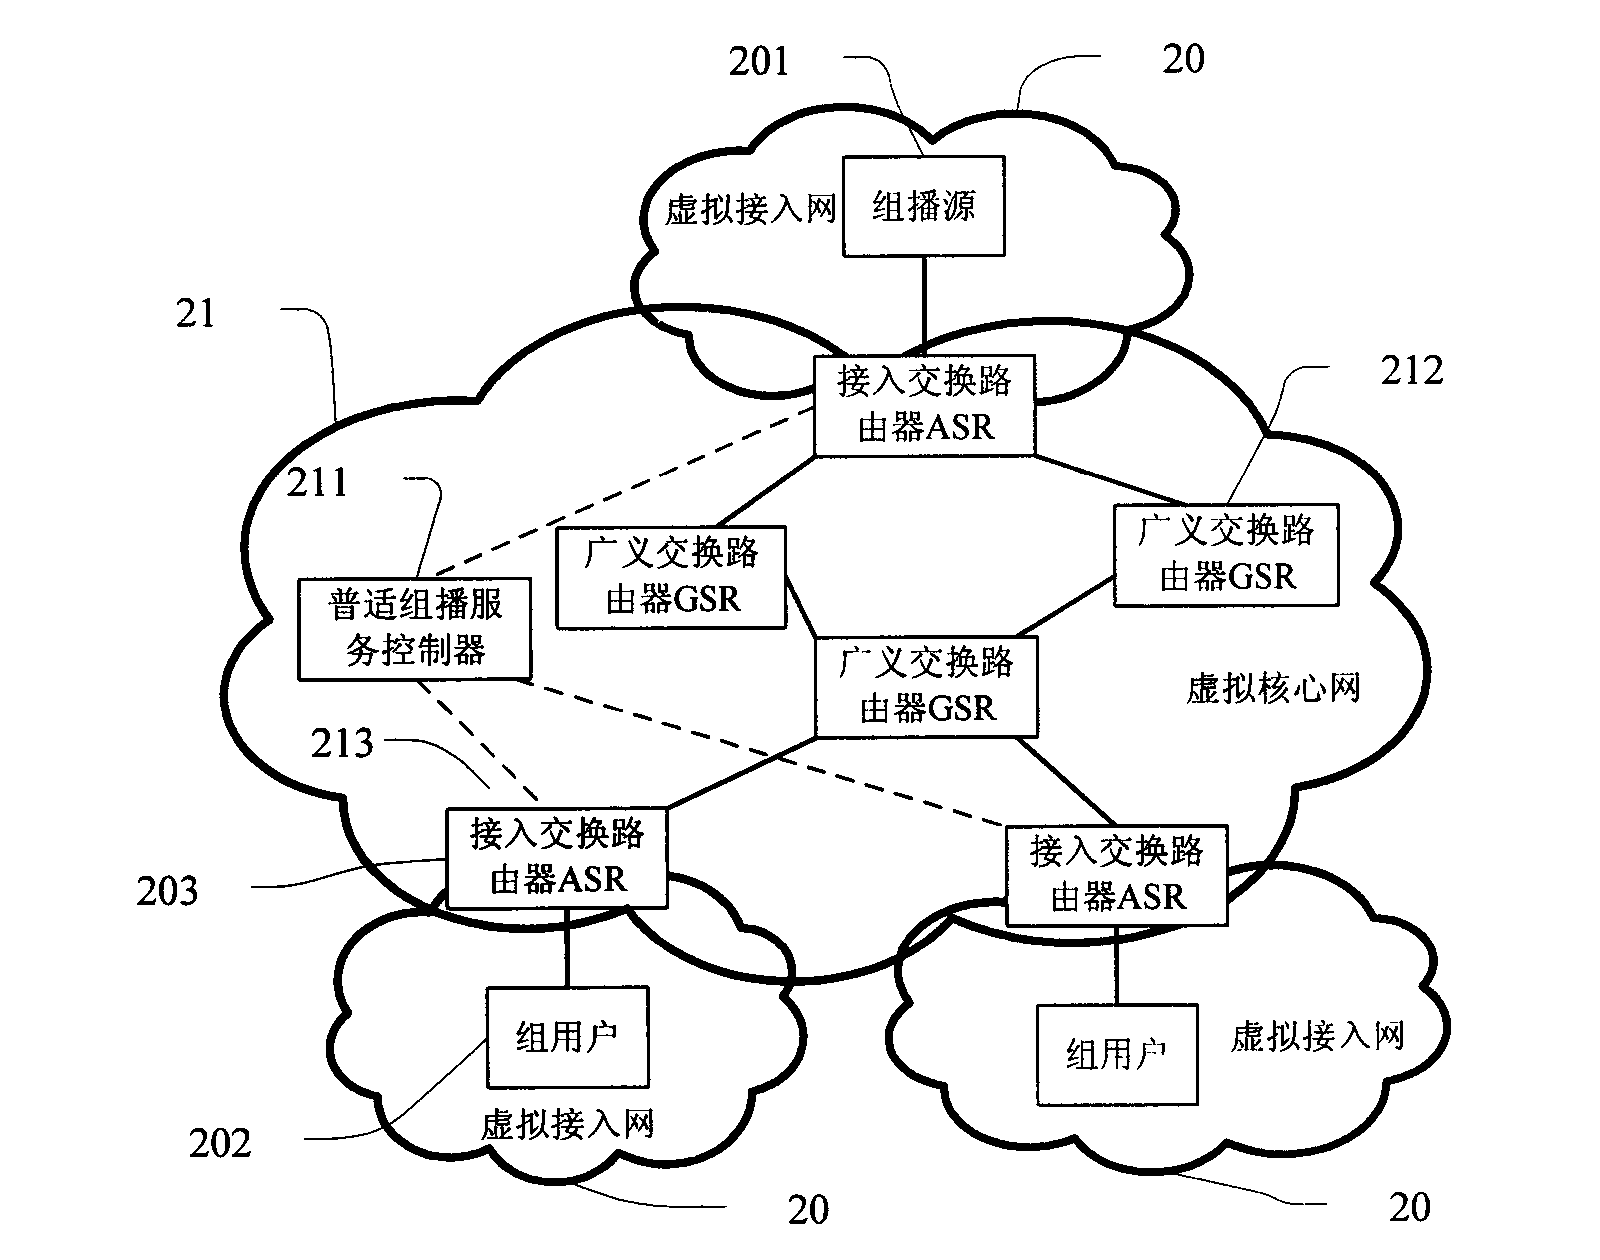 Realizing system of multicast routing based on mark and method thereof